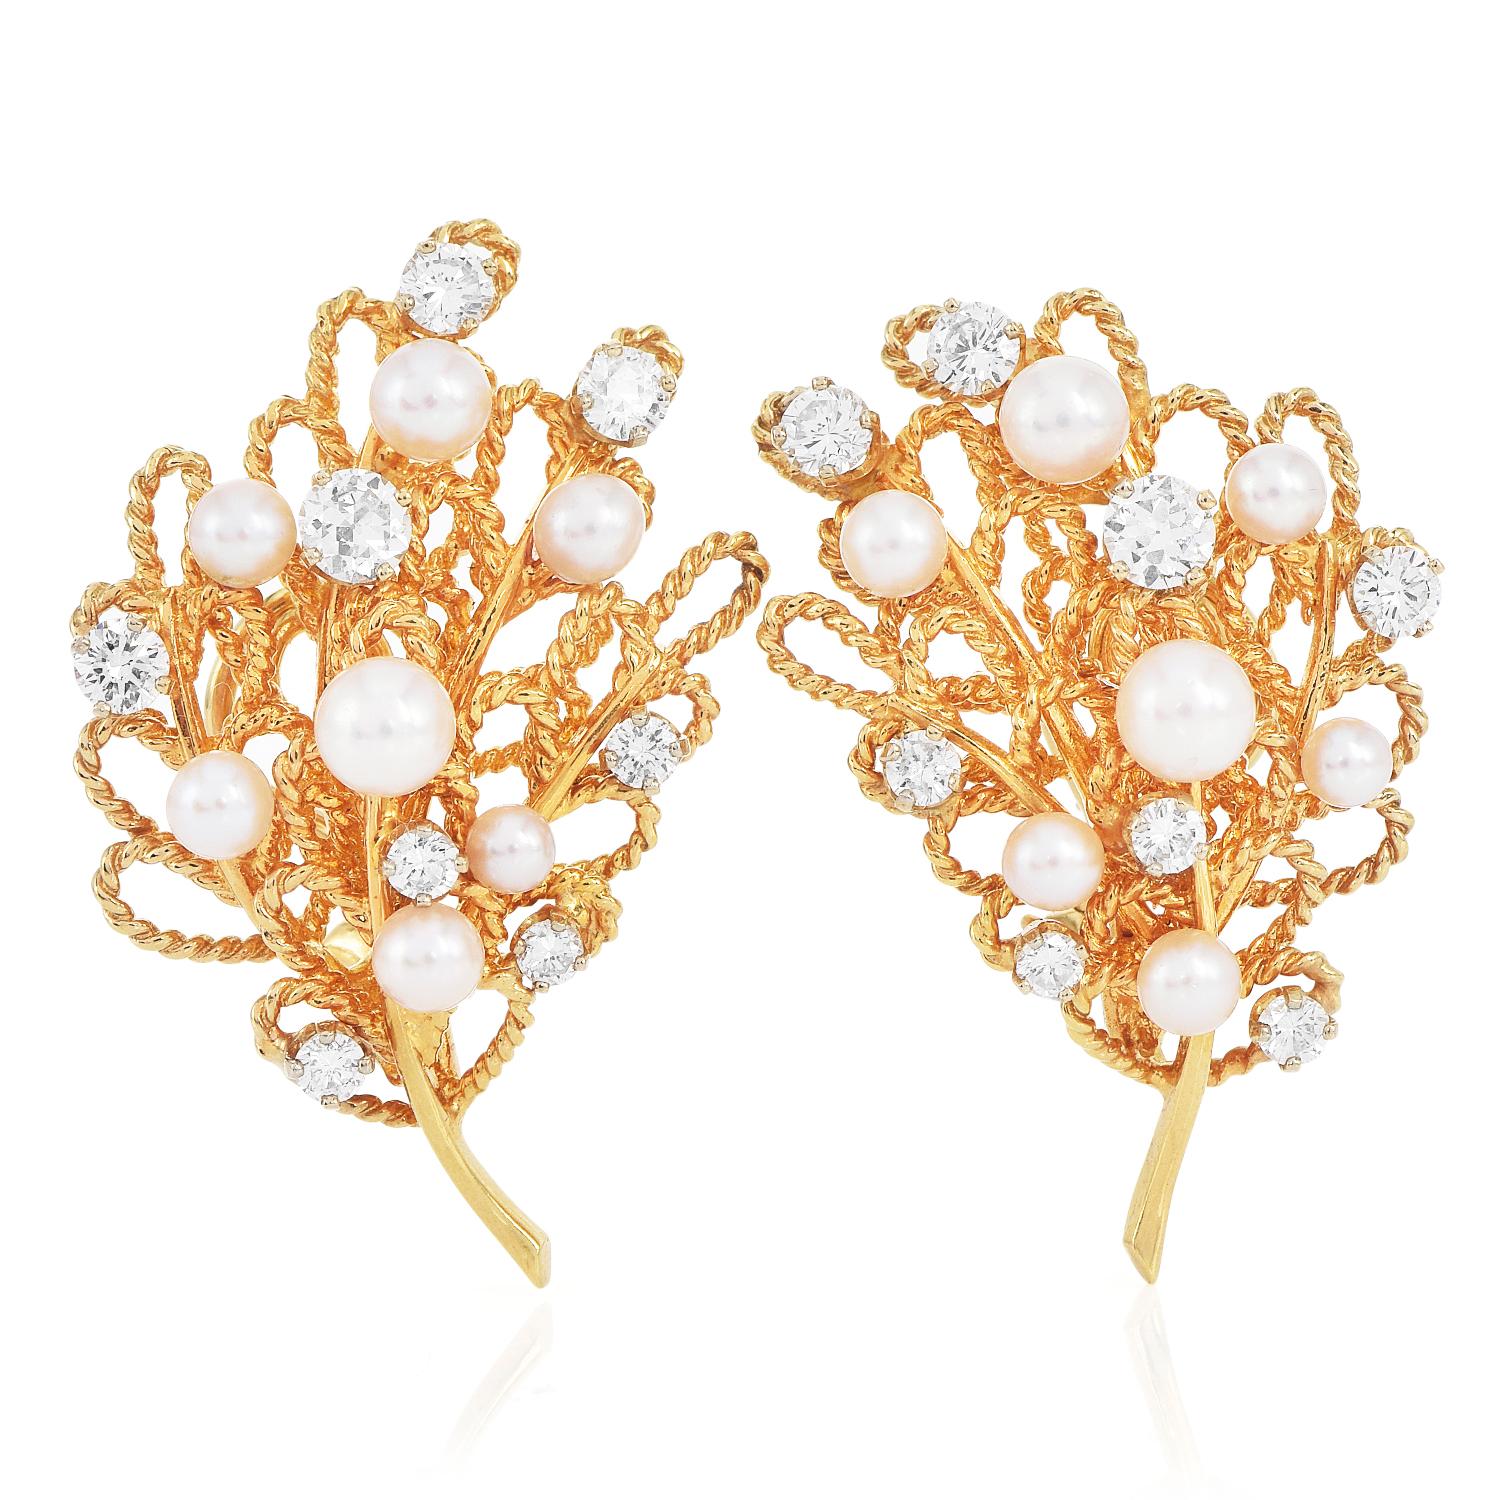 Fine rope finish inspired on a floral bouquet creates a multi-level effect on these highly detailed clip-on earrings.

Crafted in Luxurious 22K yellow gold, these earrings

measure appx. 2 x 1 inch long.

(16) round brilliant cut Diamonds, add shine